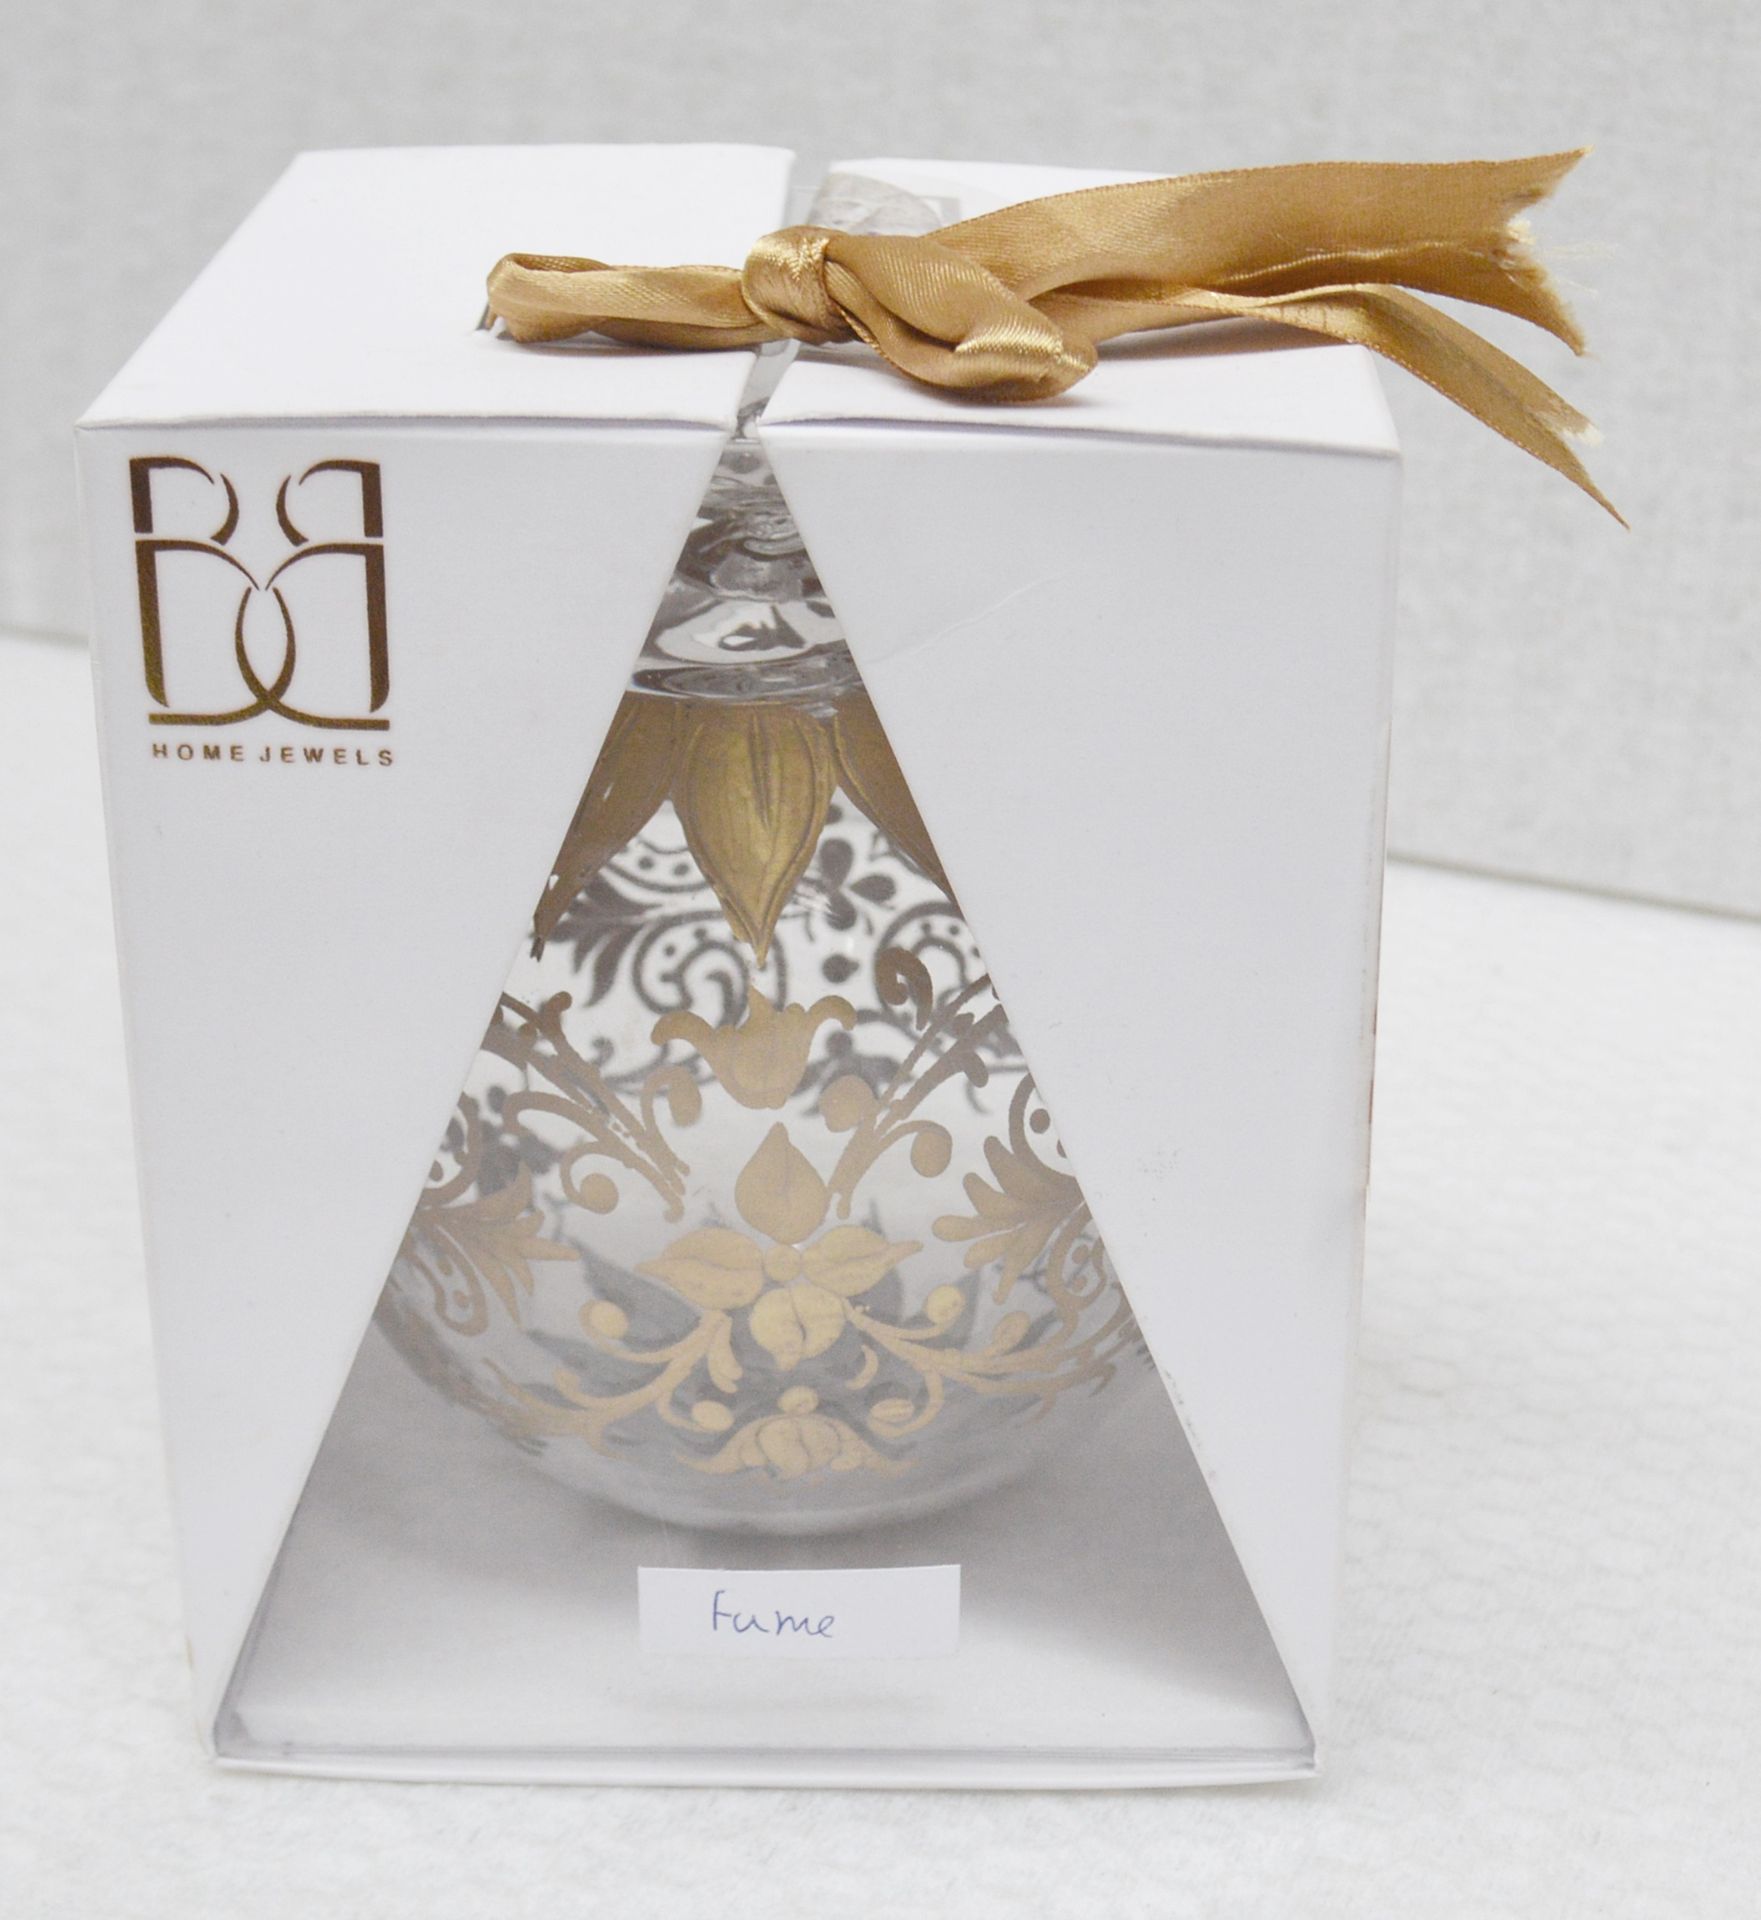 1 x BALDI 'Home Jewels' Italian Hand-crafted Artisan Christmas Tree Decoration In Gold - Dimensions: